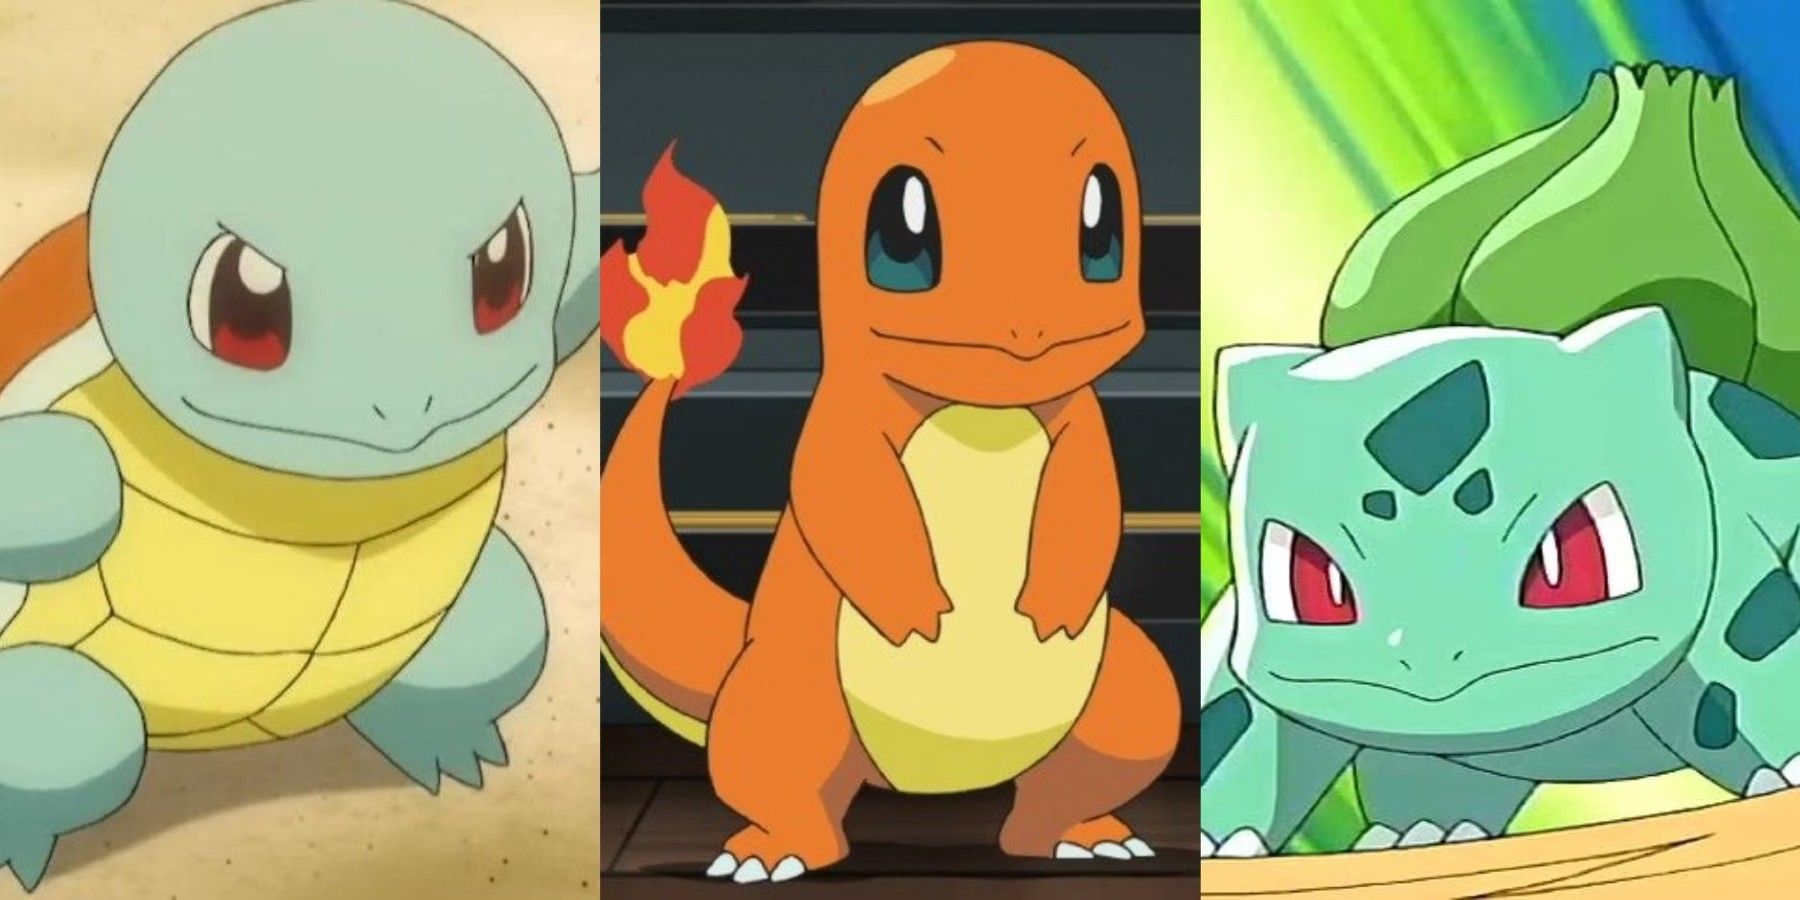 The starter Pokemon of the Kanto region Squirtle, Charmander, and Bulbasaur.